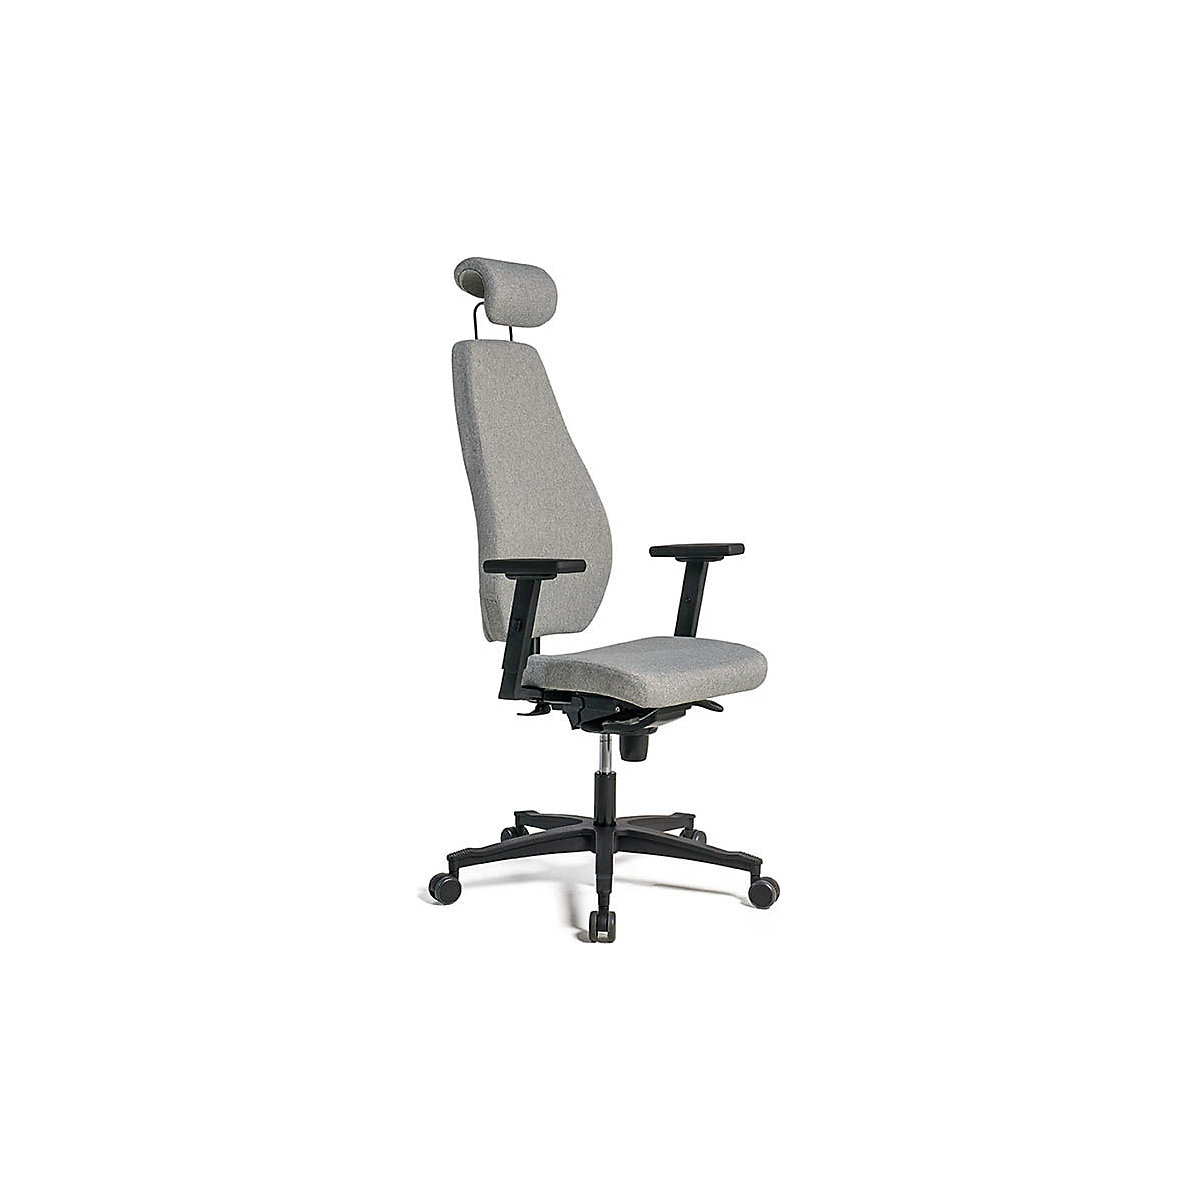 Office swivel chair, synchronous mechanism